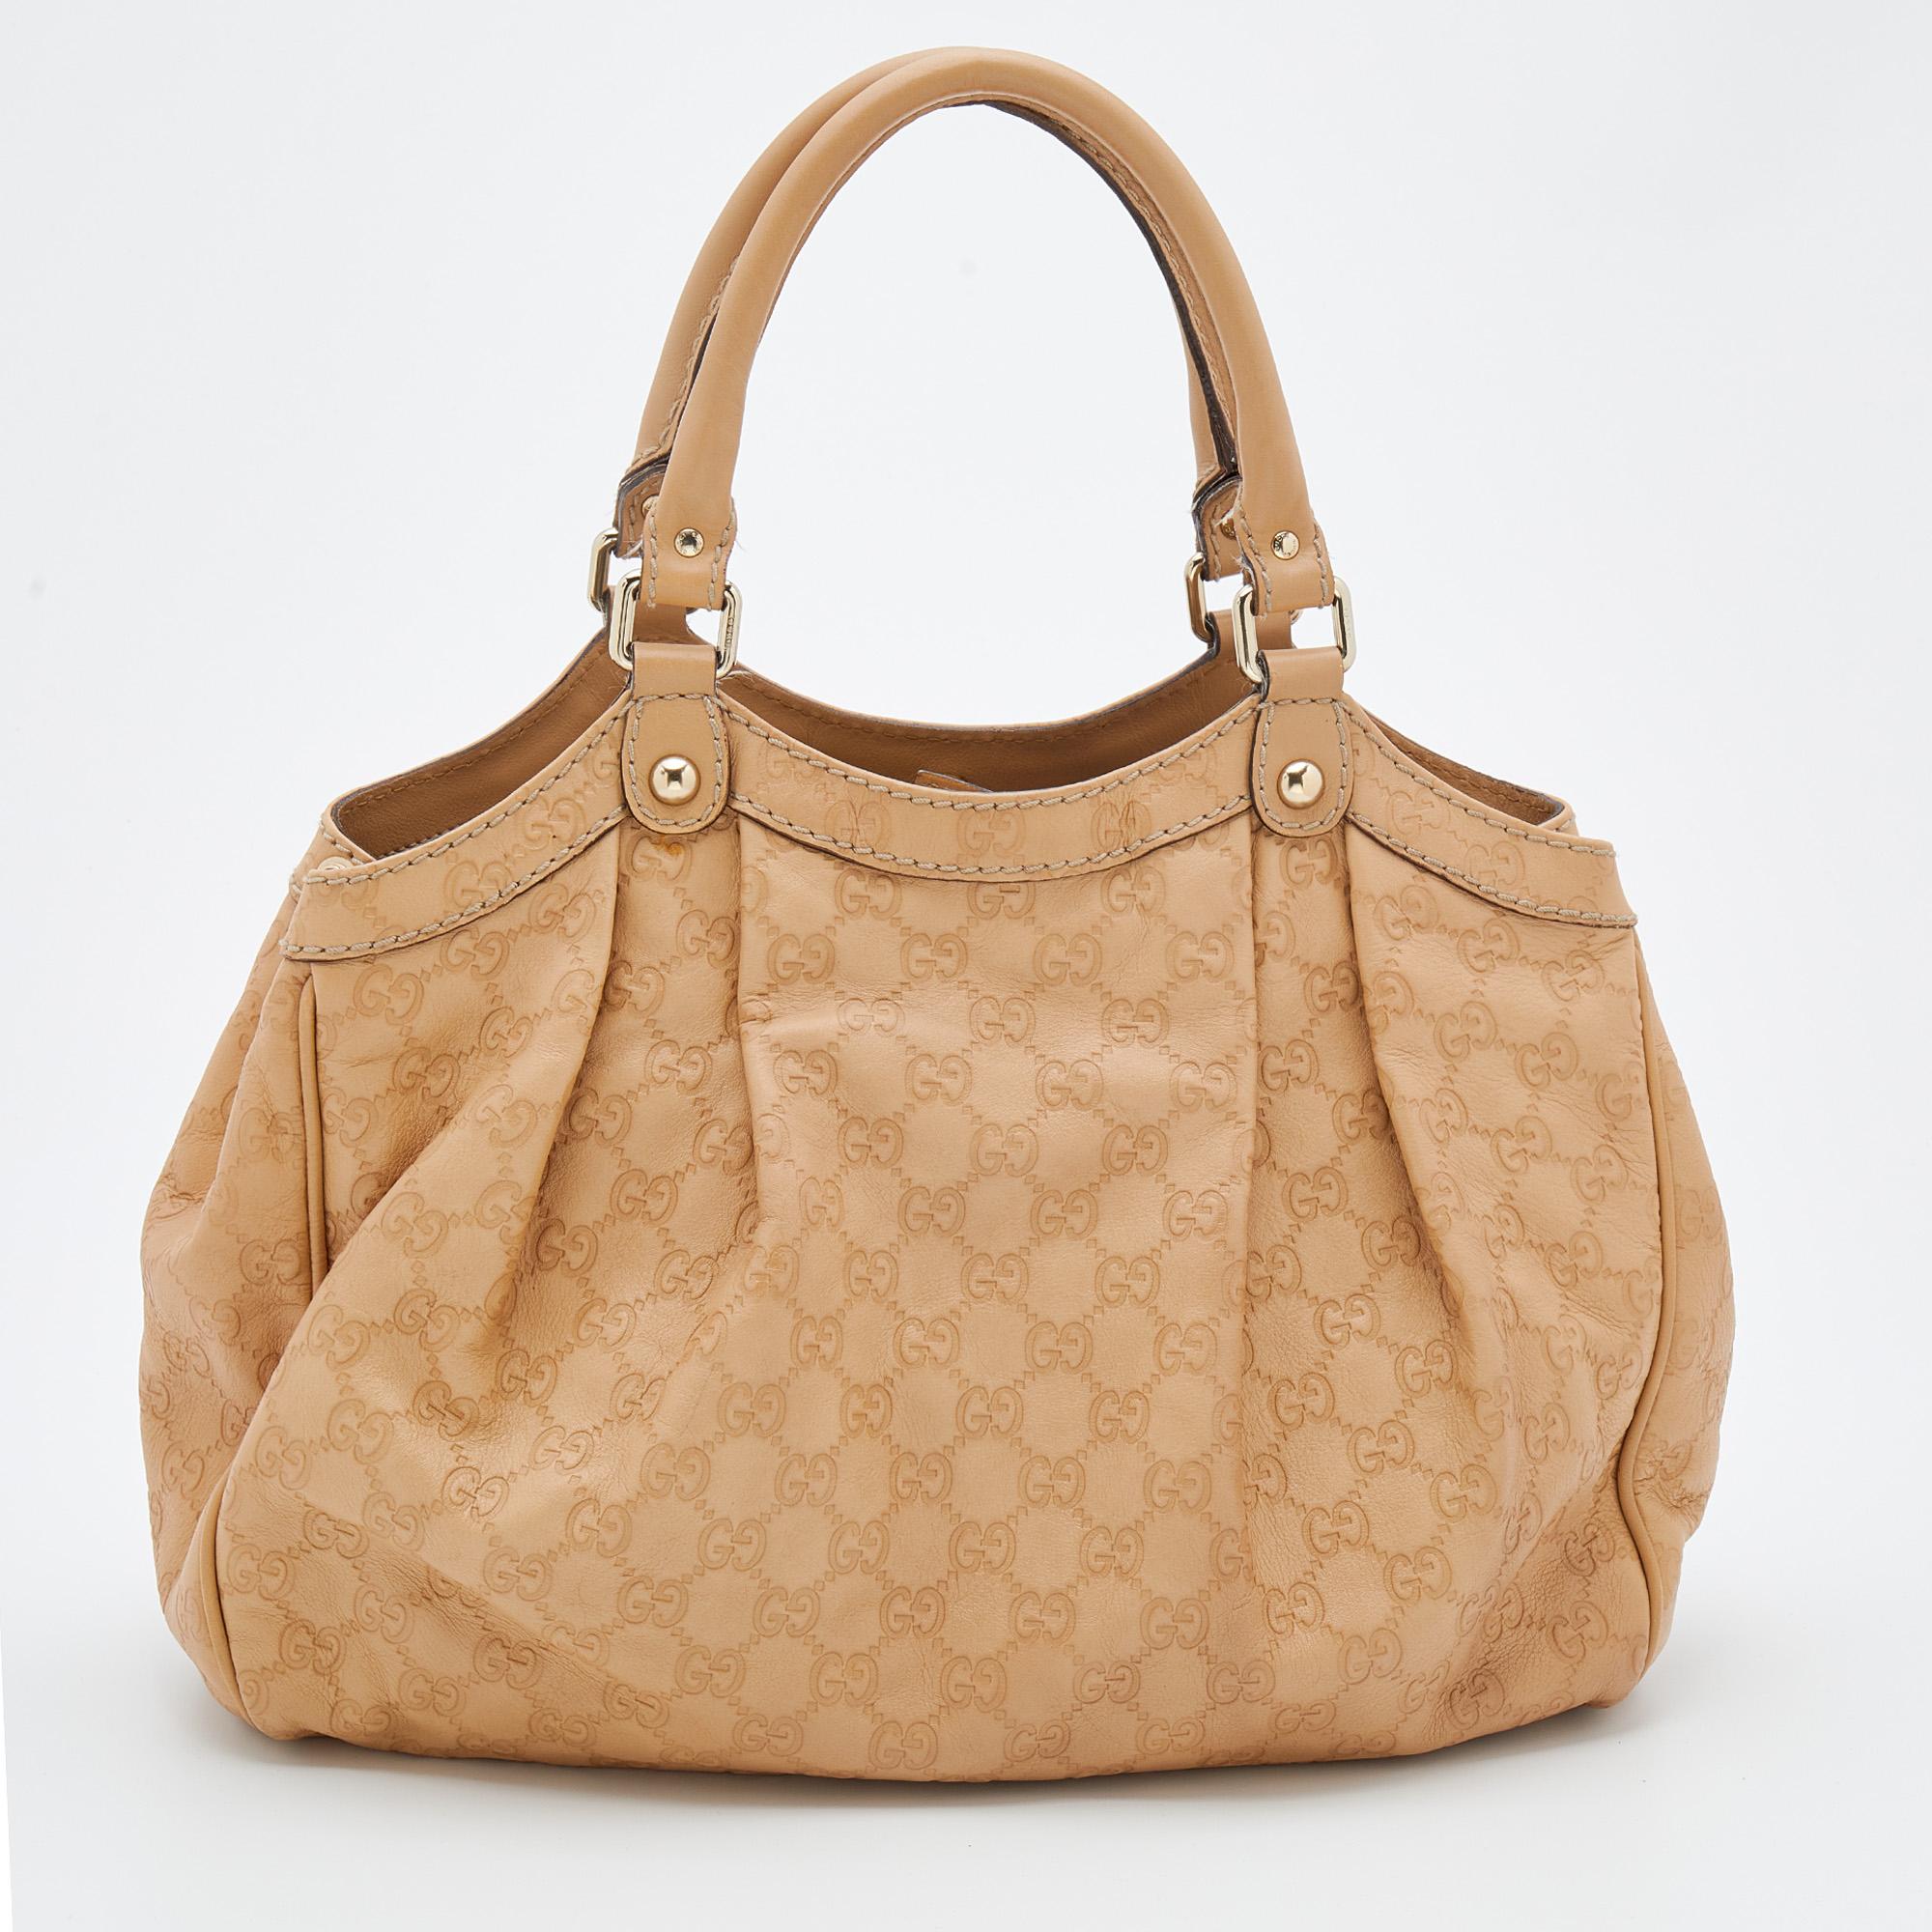 Enriched with signature details, this Sukey hobo from Gucci will surely win your vote as a favorite. It comes crafted from Guccissima leather and flaunts dual handles at the top, gold-tone accents, and neat pleats. Lined with canvas, its spacious